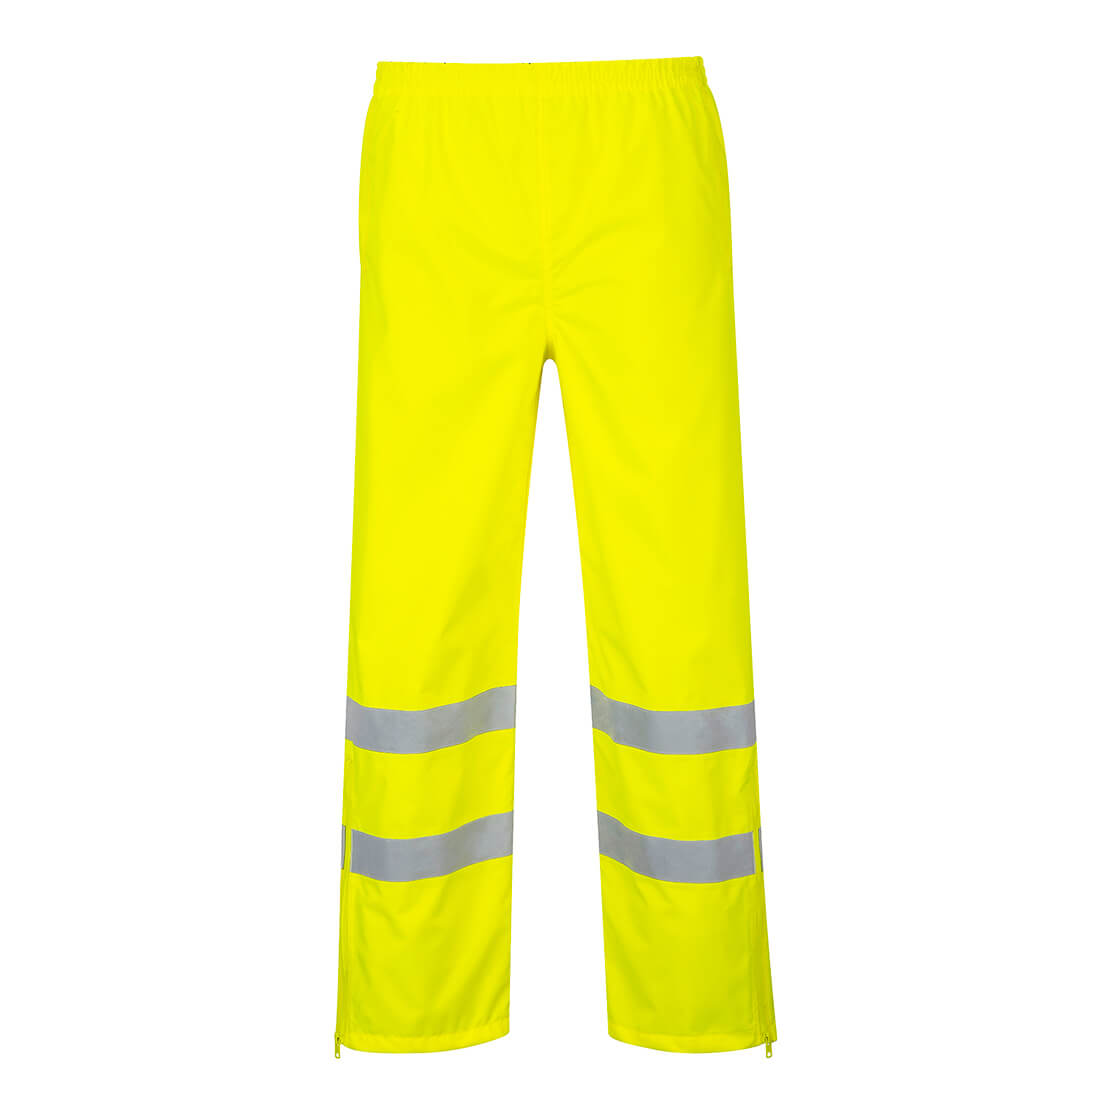 Image of Oxford Weave 300D Class 1 Breathable Hi Vis Breathable Trousers Yellow 2XL